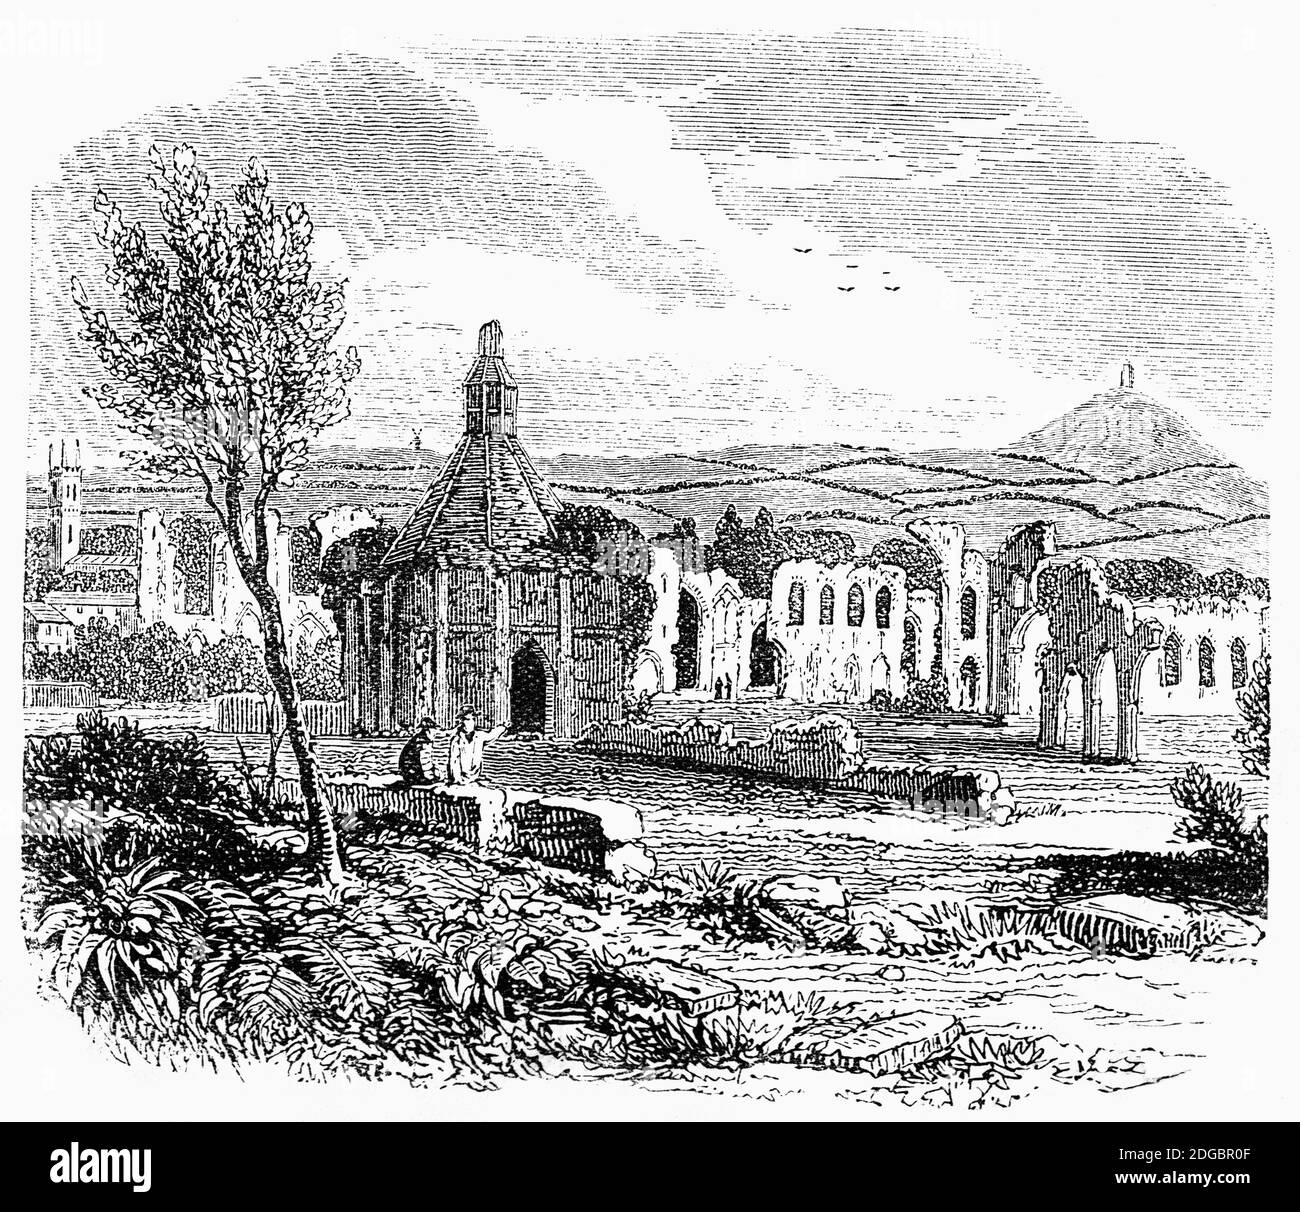 A 19th century view of the Abbot's Kitchen in Glastonbury Abbey, Somerset, England, with the Tor in the background. The monastery, founded in the 7th century was by the 14th century one of the richest and most powerful monasteries in England until suppressed during the Dissolution of the Monasteries under King Henry VIII of England. From the 12th century the Glastonbury area has been associated with the legend of King Arthur, a connection promoted by medieval monks who asserted that Glastonbury was Avalon. Christian legends have also claimed that the abbey was founded by Joseph of Arimathea in Stock Photo